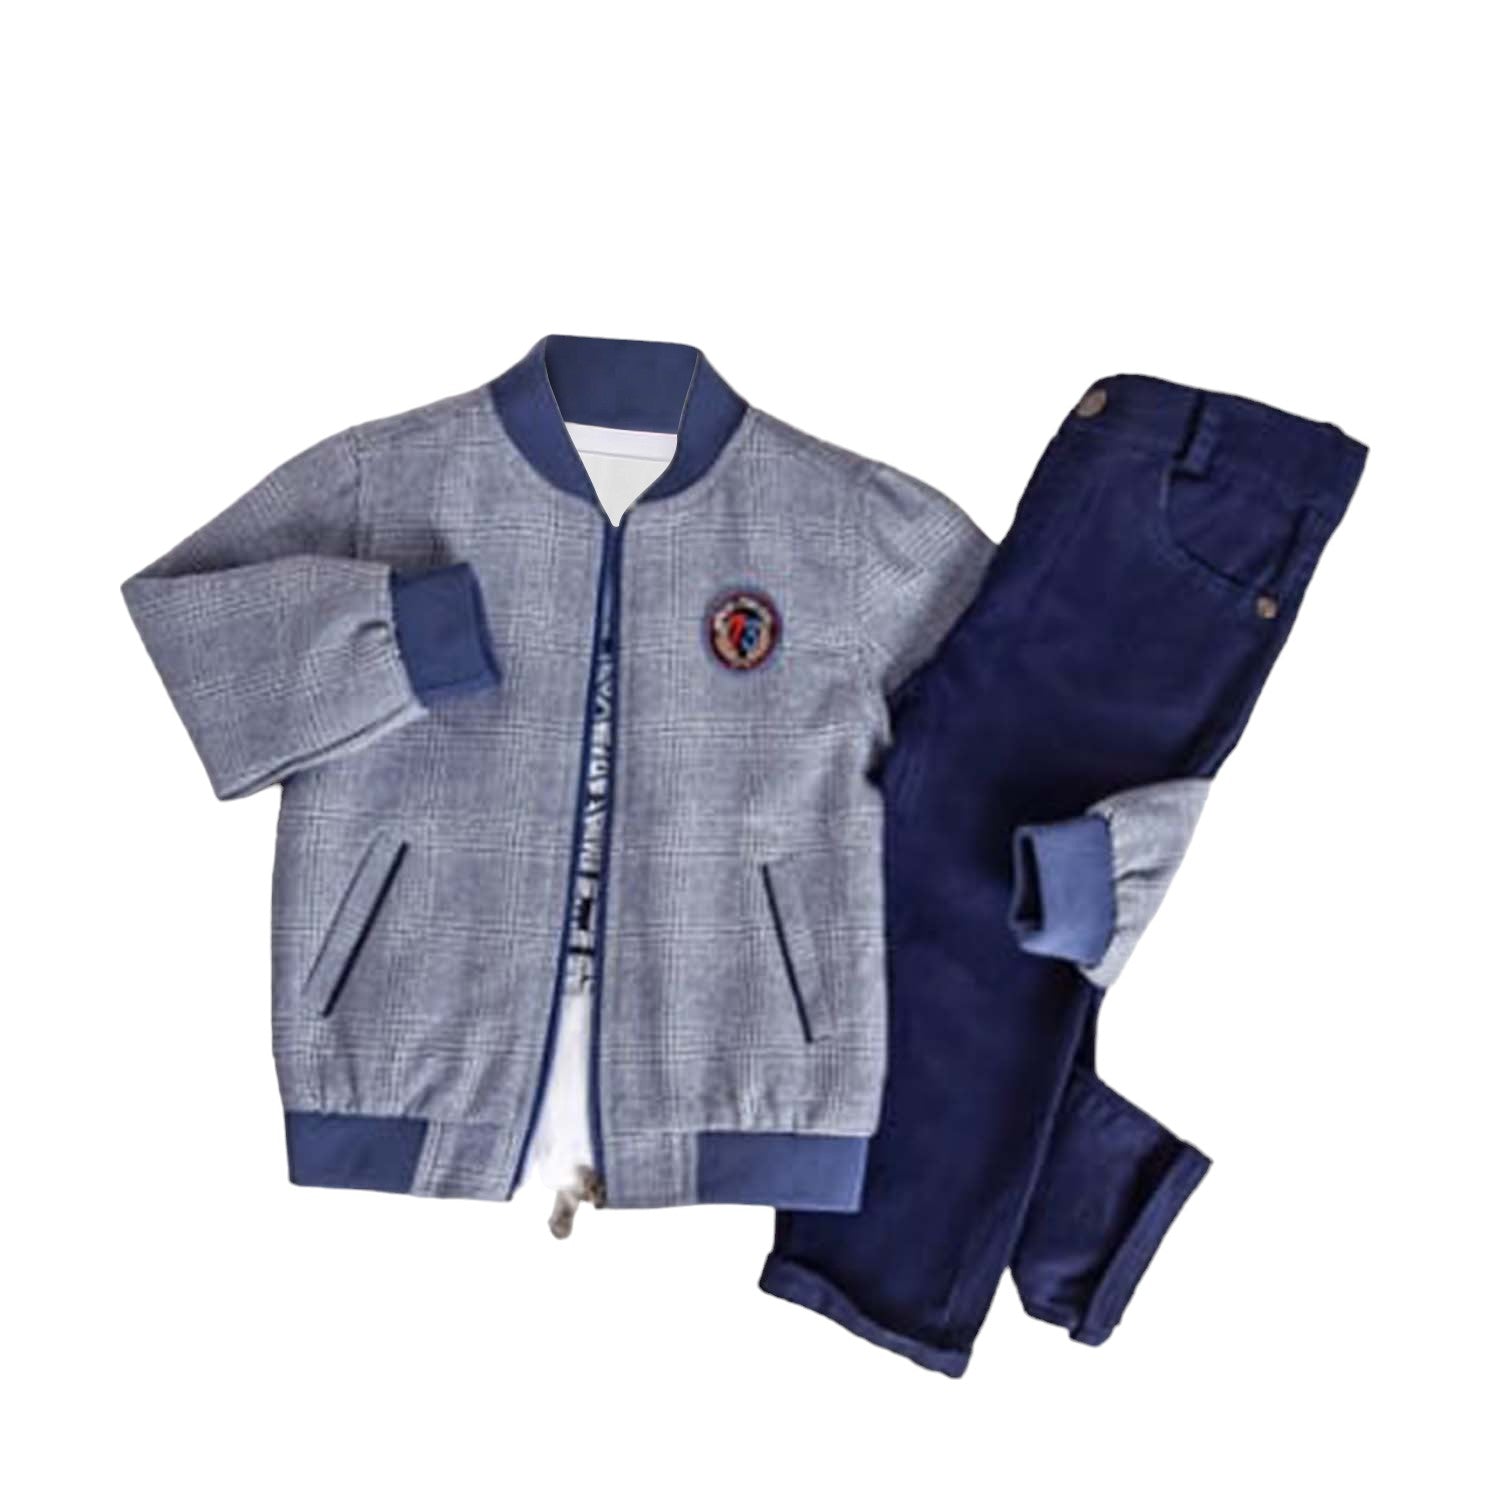 Little Boys' Jacket, T-Shirt and Jeans 3-Piece Set in Comfortable Cotton - 0